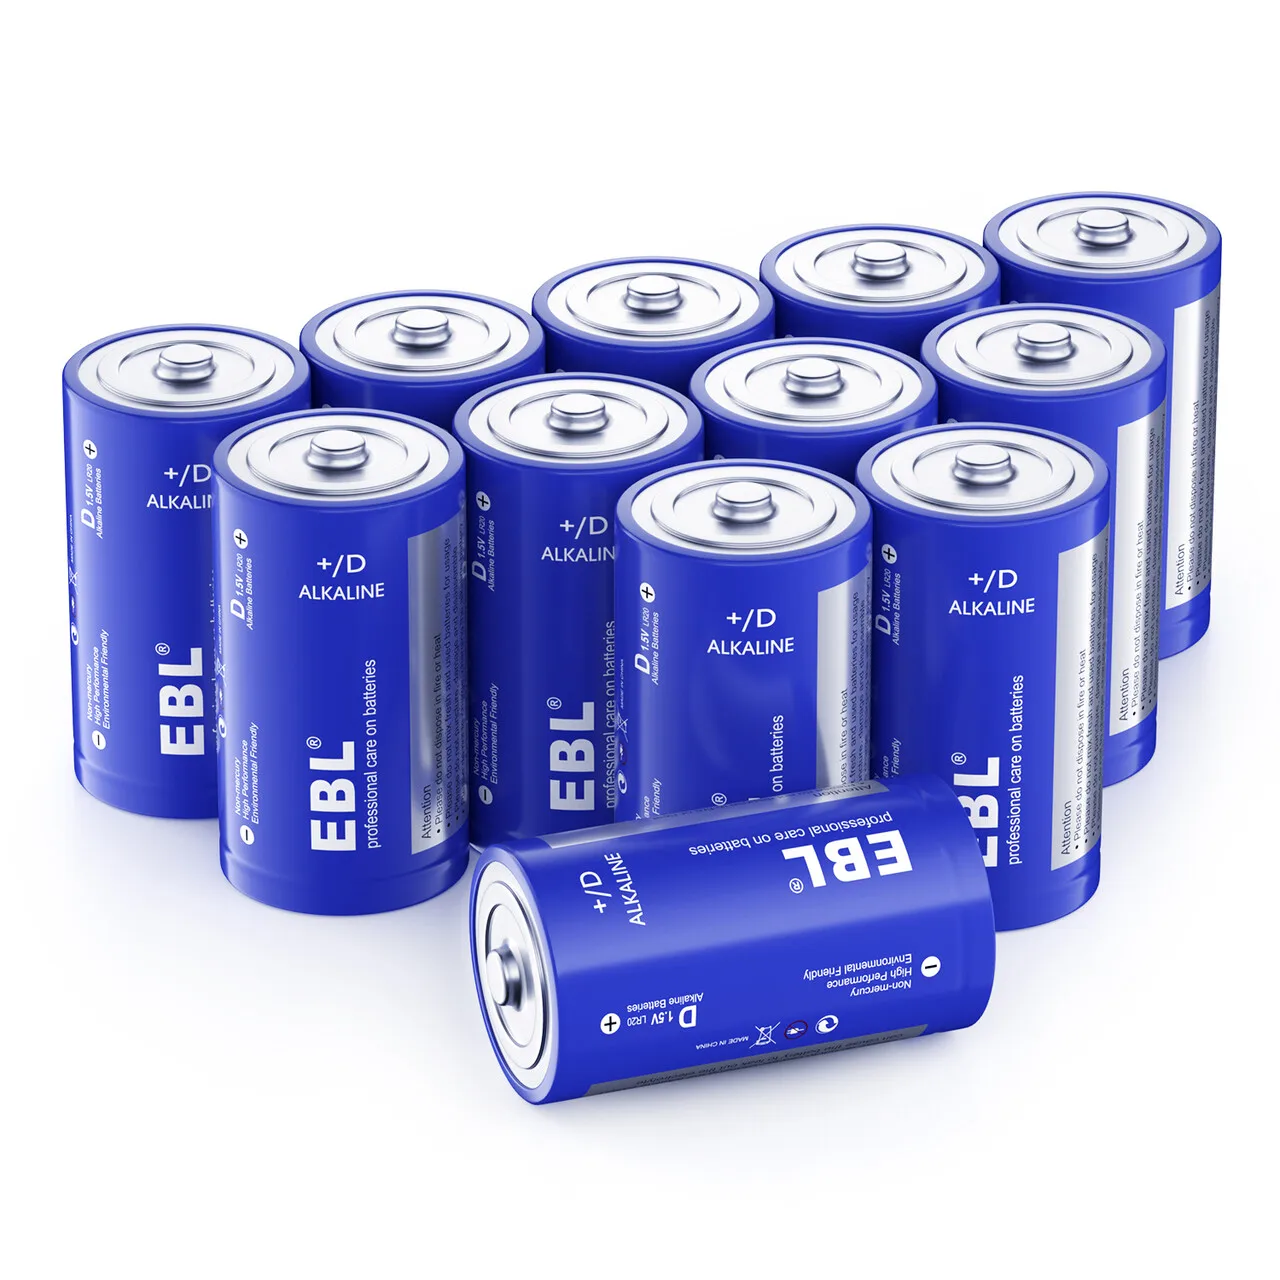 

EBL Top Selling Wholesale High Capacity D Size LR20 20000mAh Battery Cell 1.5V Dry Alkaline Primary Batteries Pack